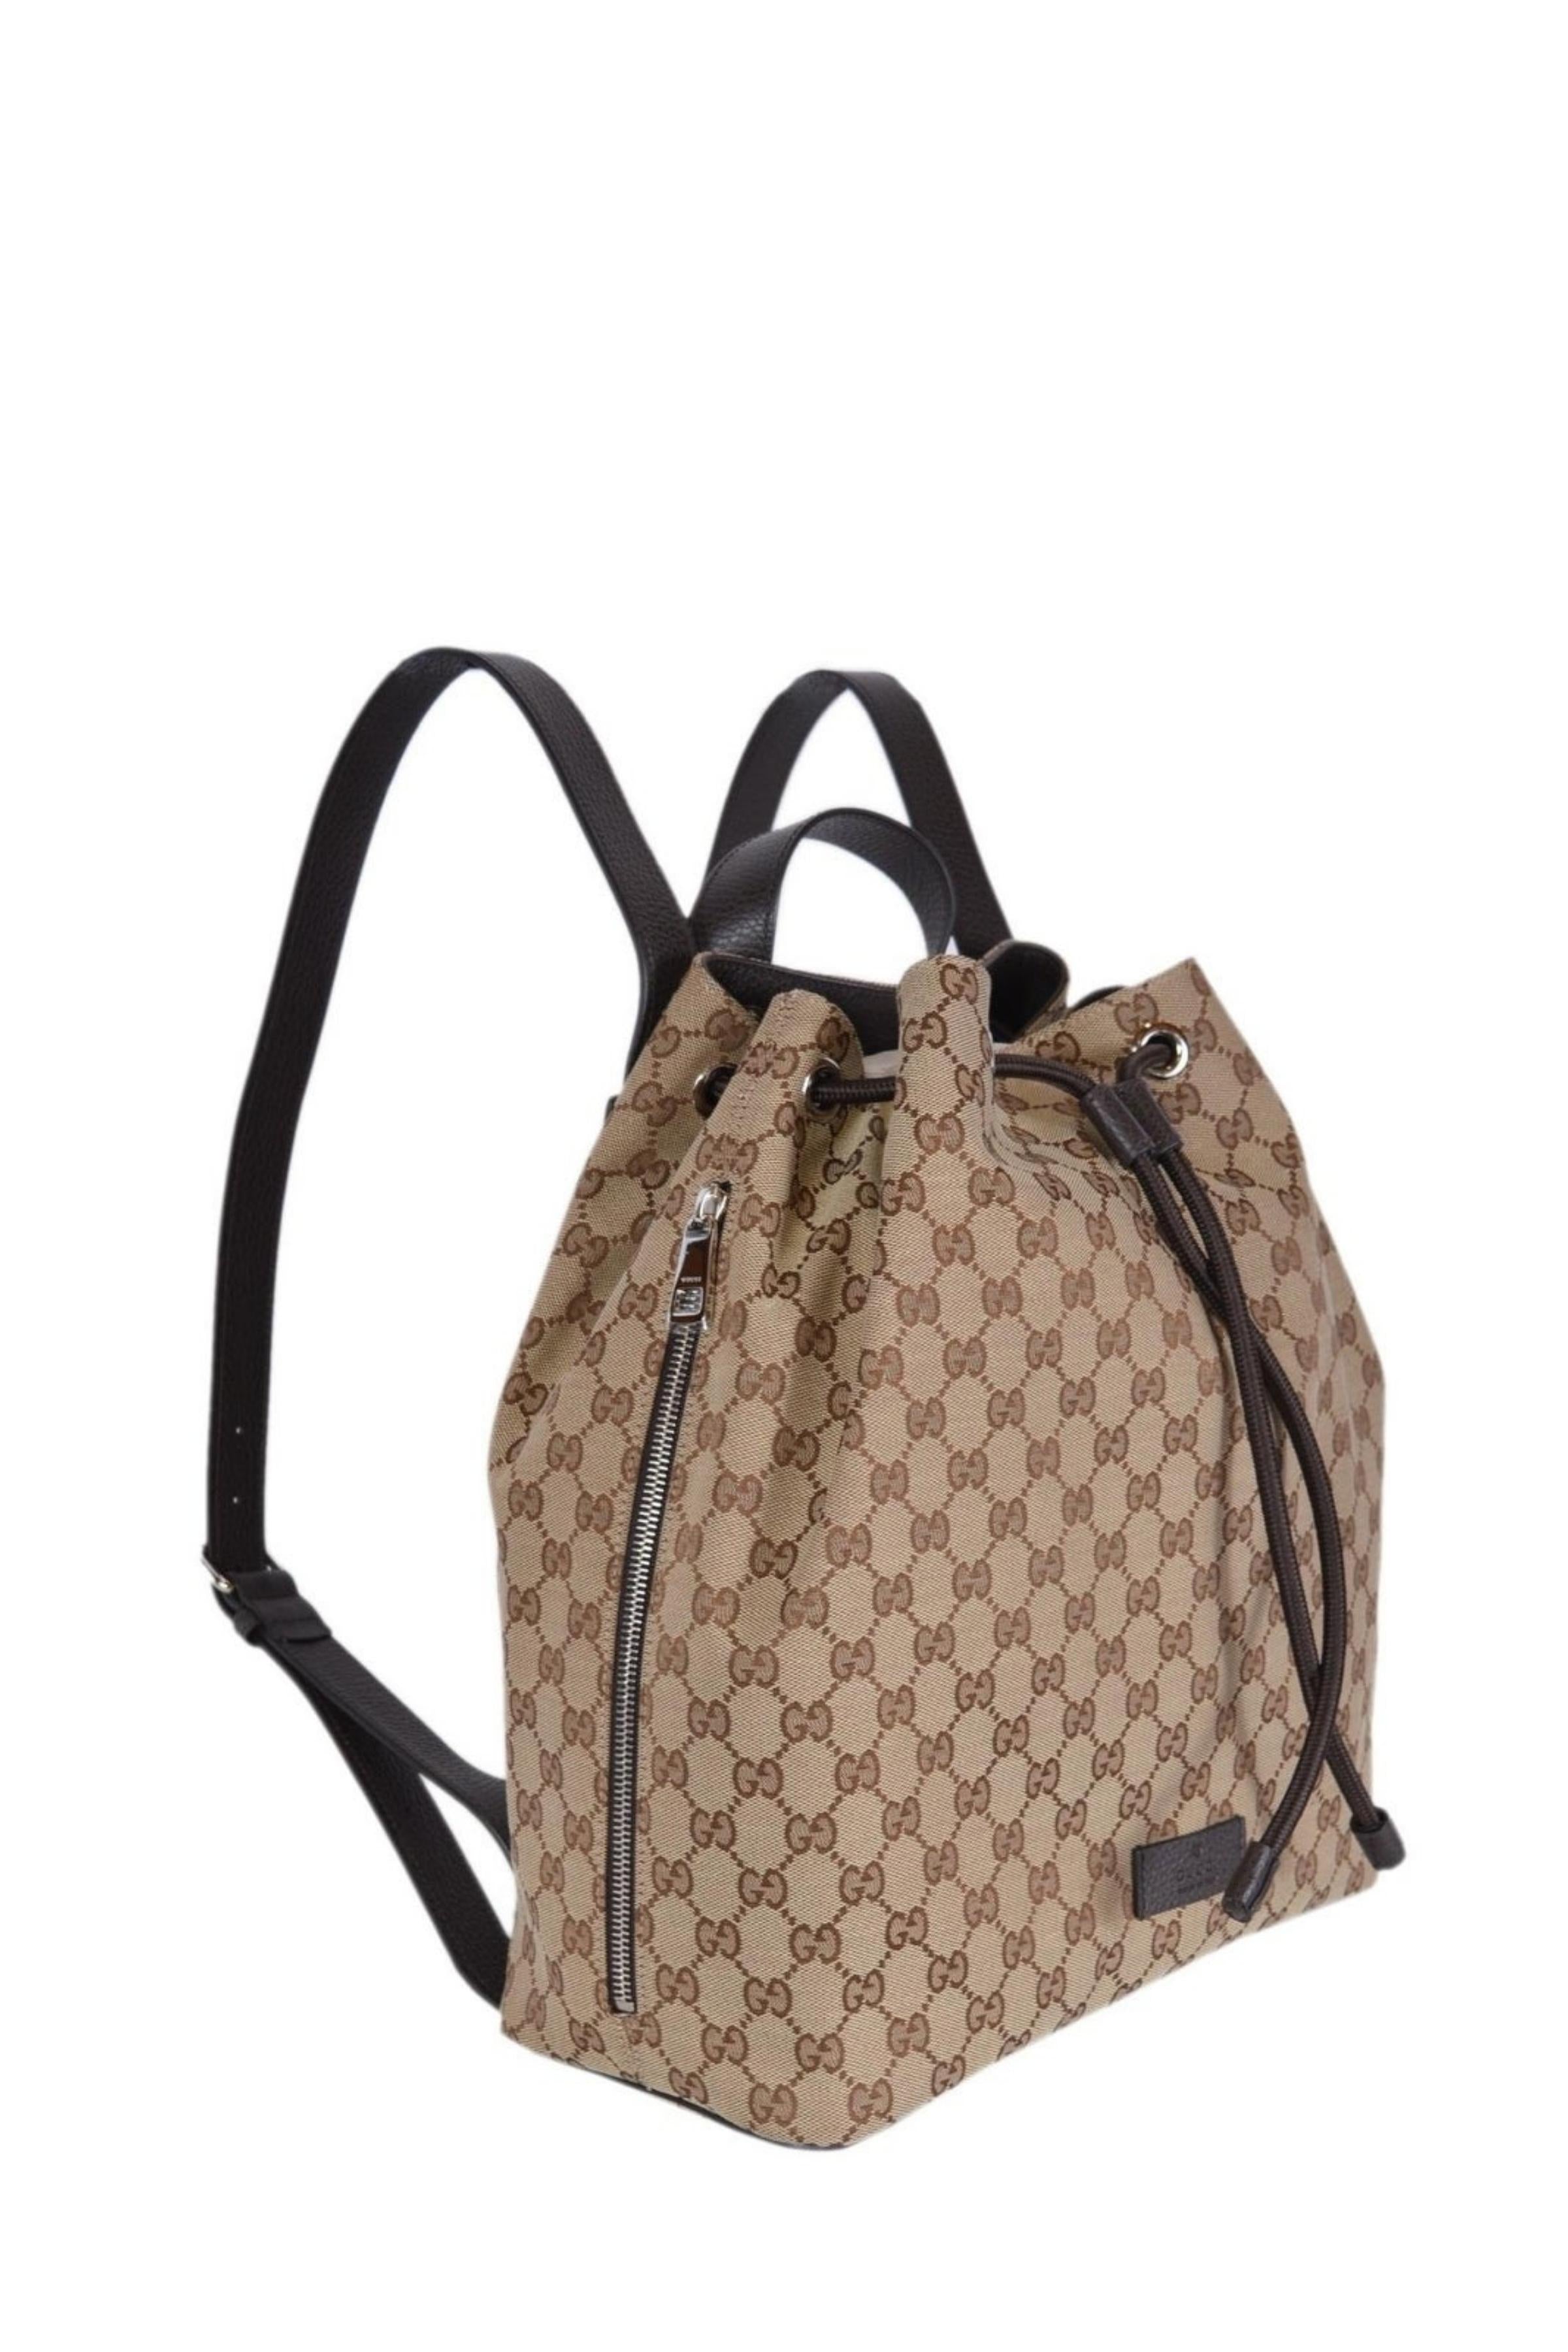 GG supreme backpack in brown canvas